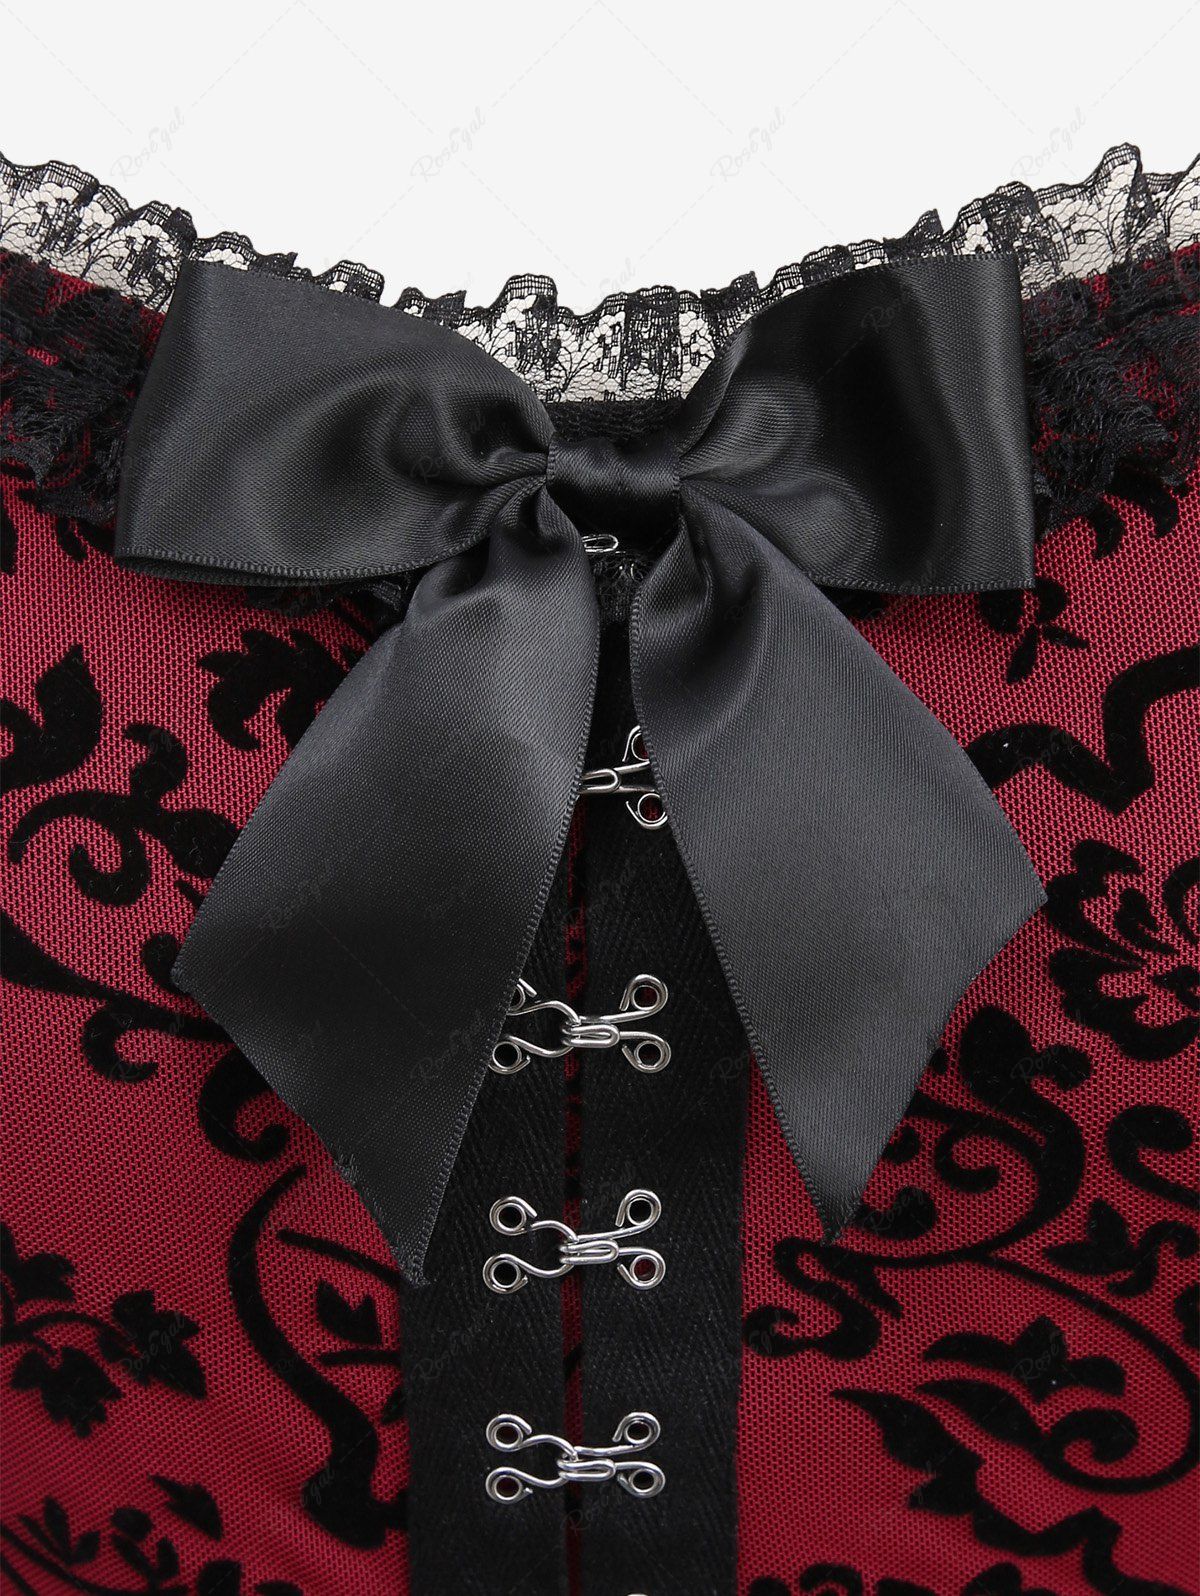 Gothic Floral Mesh Flocking Ruffles Lace Trim Bowknot Hook and Eye